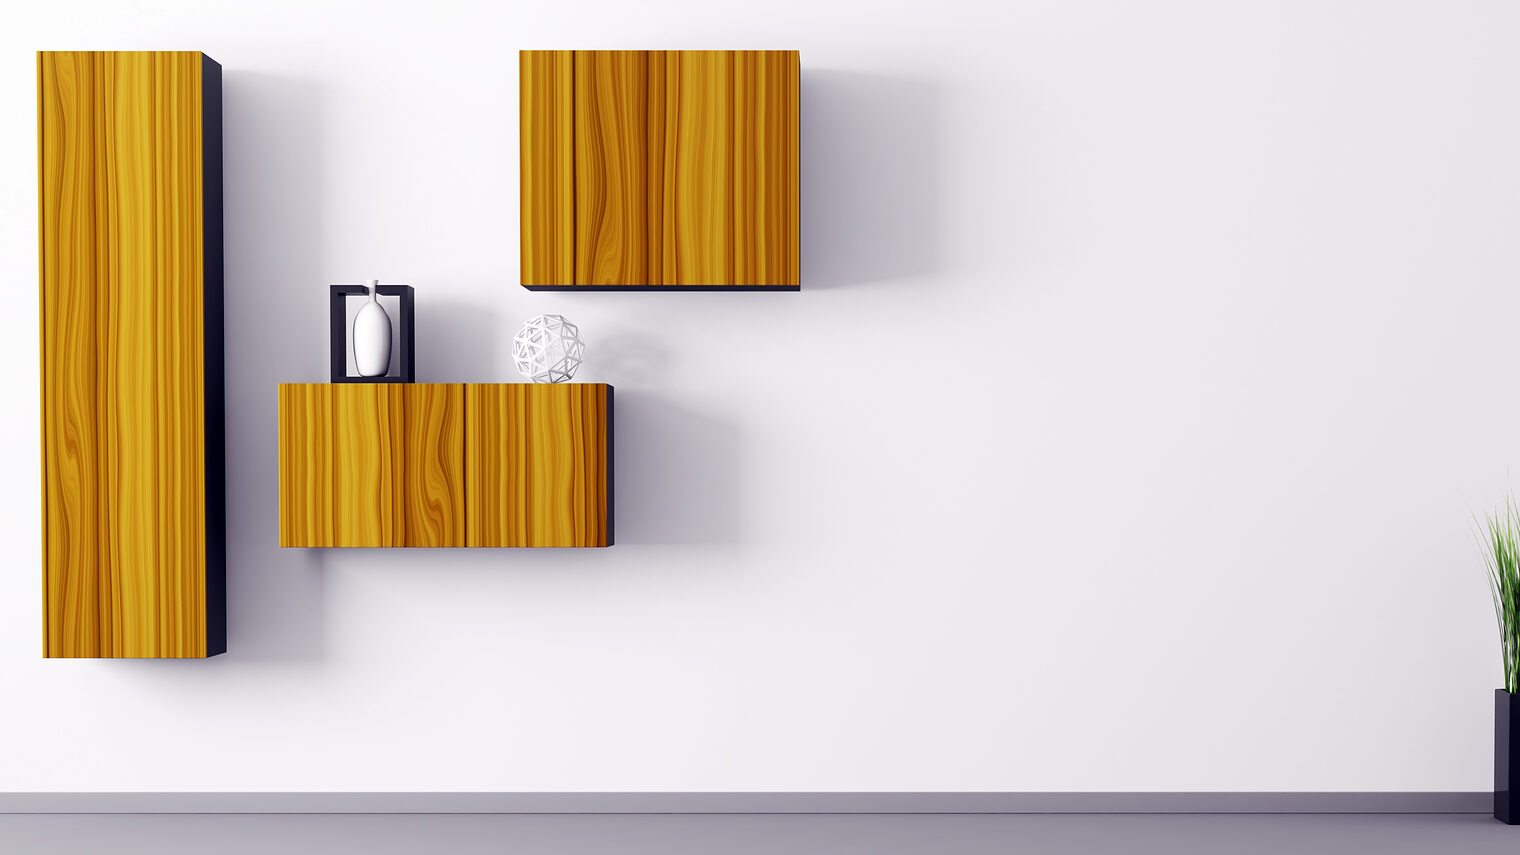 Interior of living room background 3d render Schlagwort(e): room, floor, modern, white, interior, shelf, apartment, nobody, minimalism, contemporary, decor, living, wood, wall, design, home, wooden, indoor, vase, 3d, flat, furniture, indoors, background, render, abstract, inside, gray, yellow